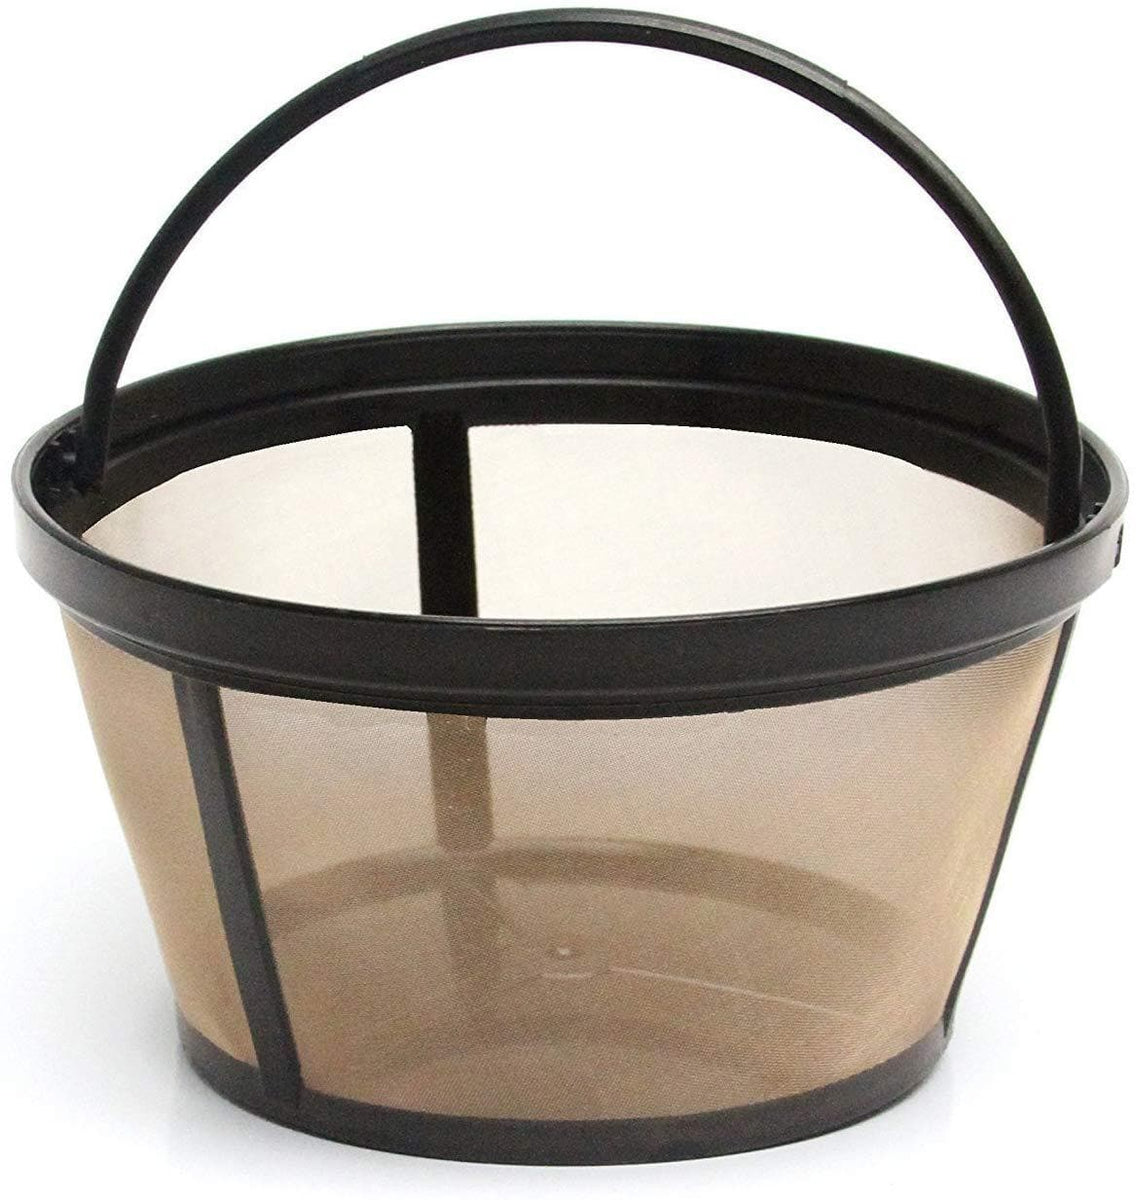 Fill 'n Brew Reusable Coffee Filter Basket for Most Mr. Coffee, Black &  Decker